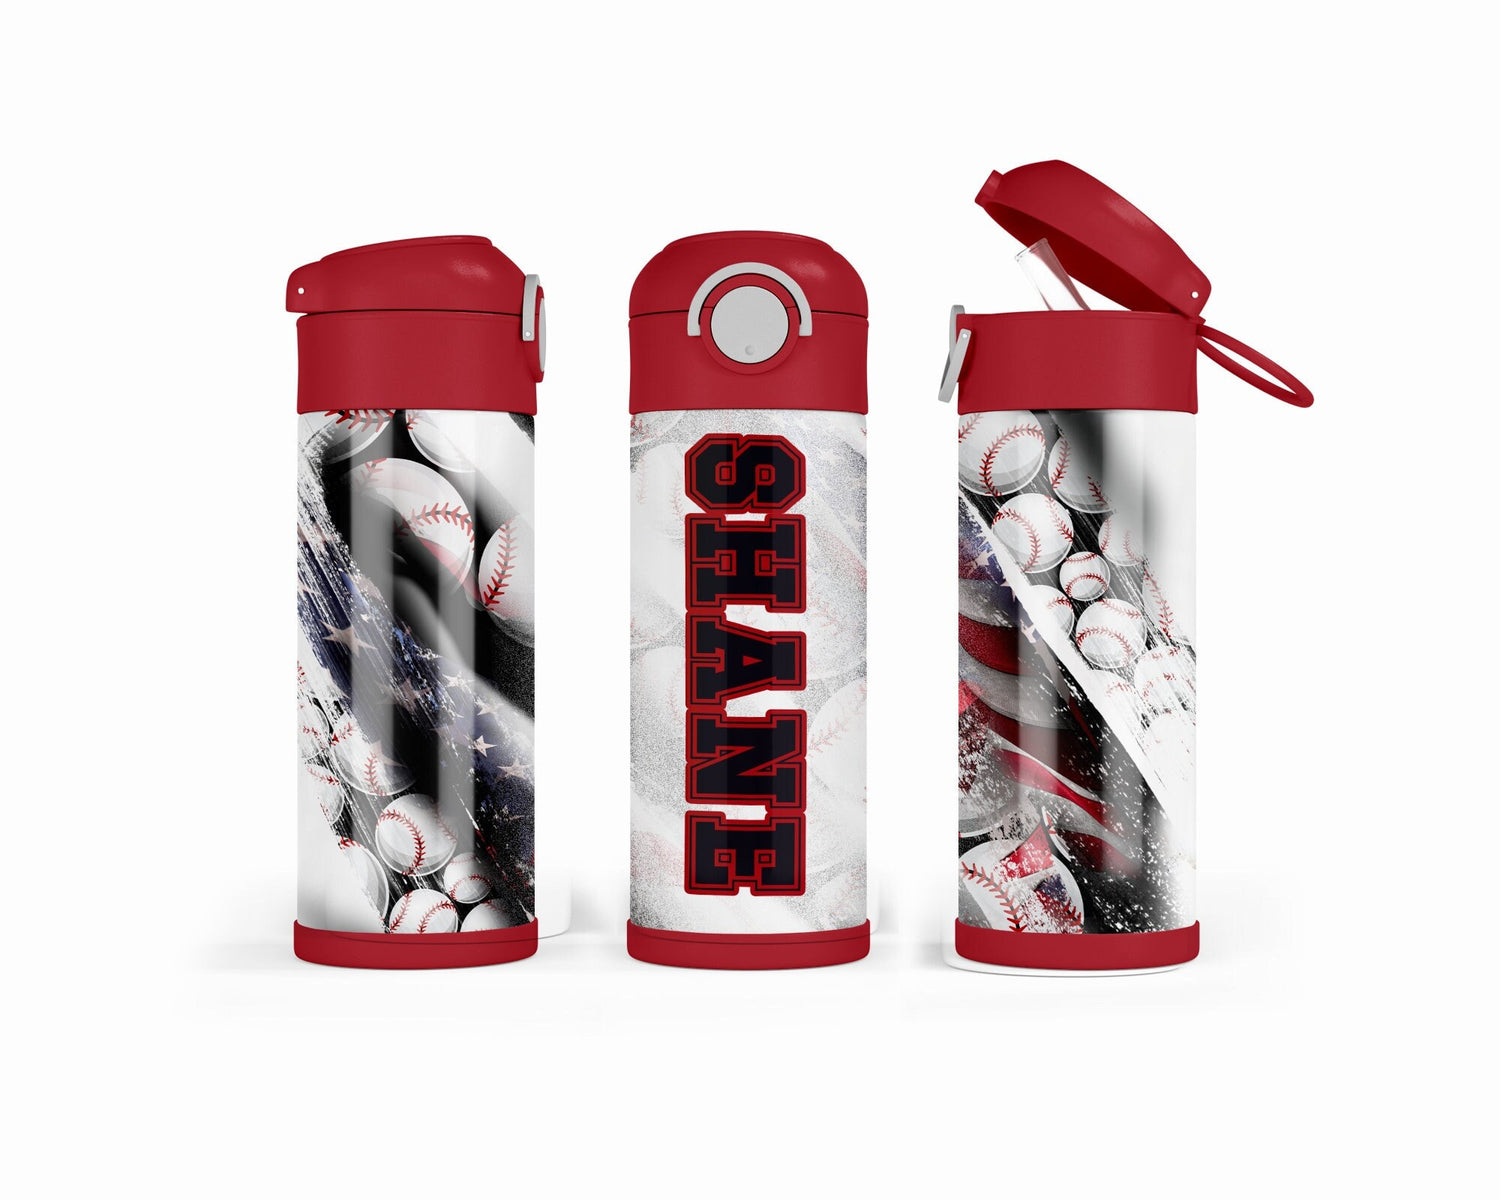 Baseball Flip Top SPILL PROOF 12oz Tumbler Personalize with a name | Birthday Gift for Kids | Back to School Cups | Reusable Kids Cups